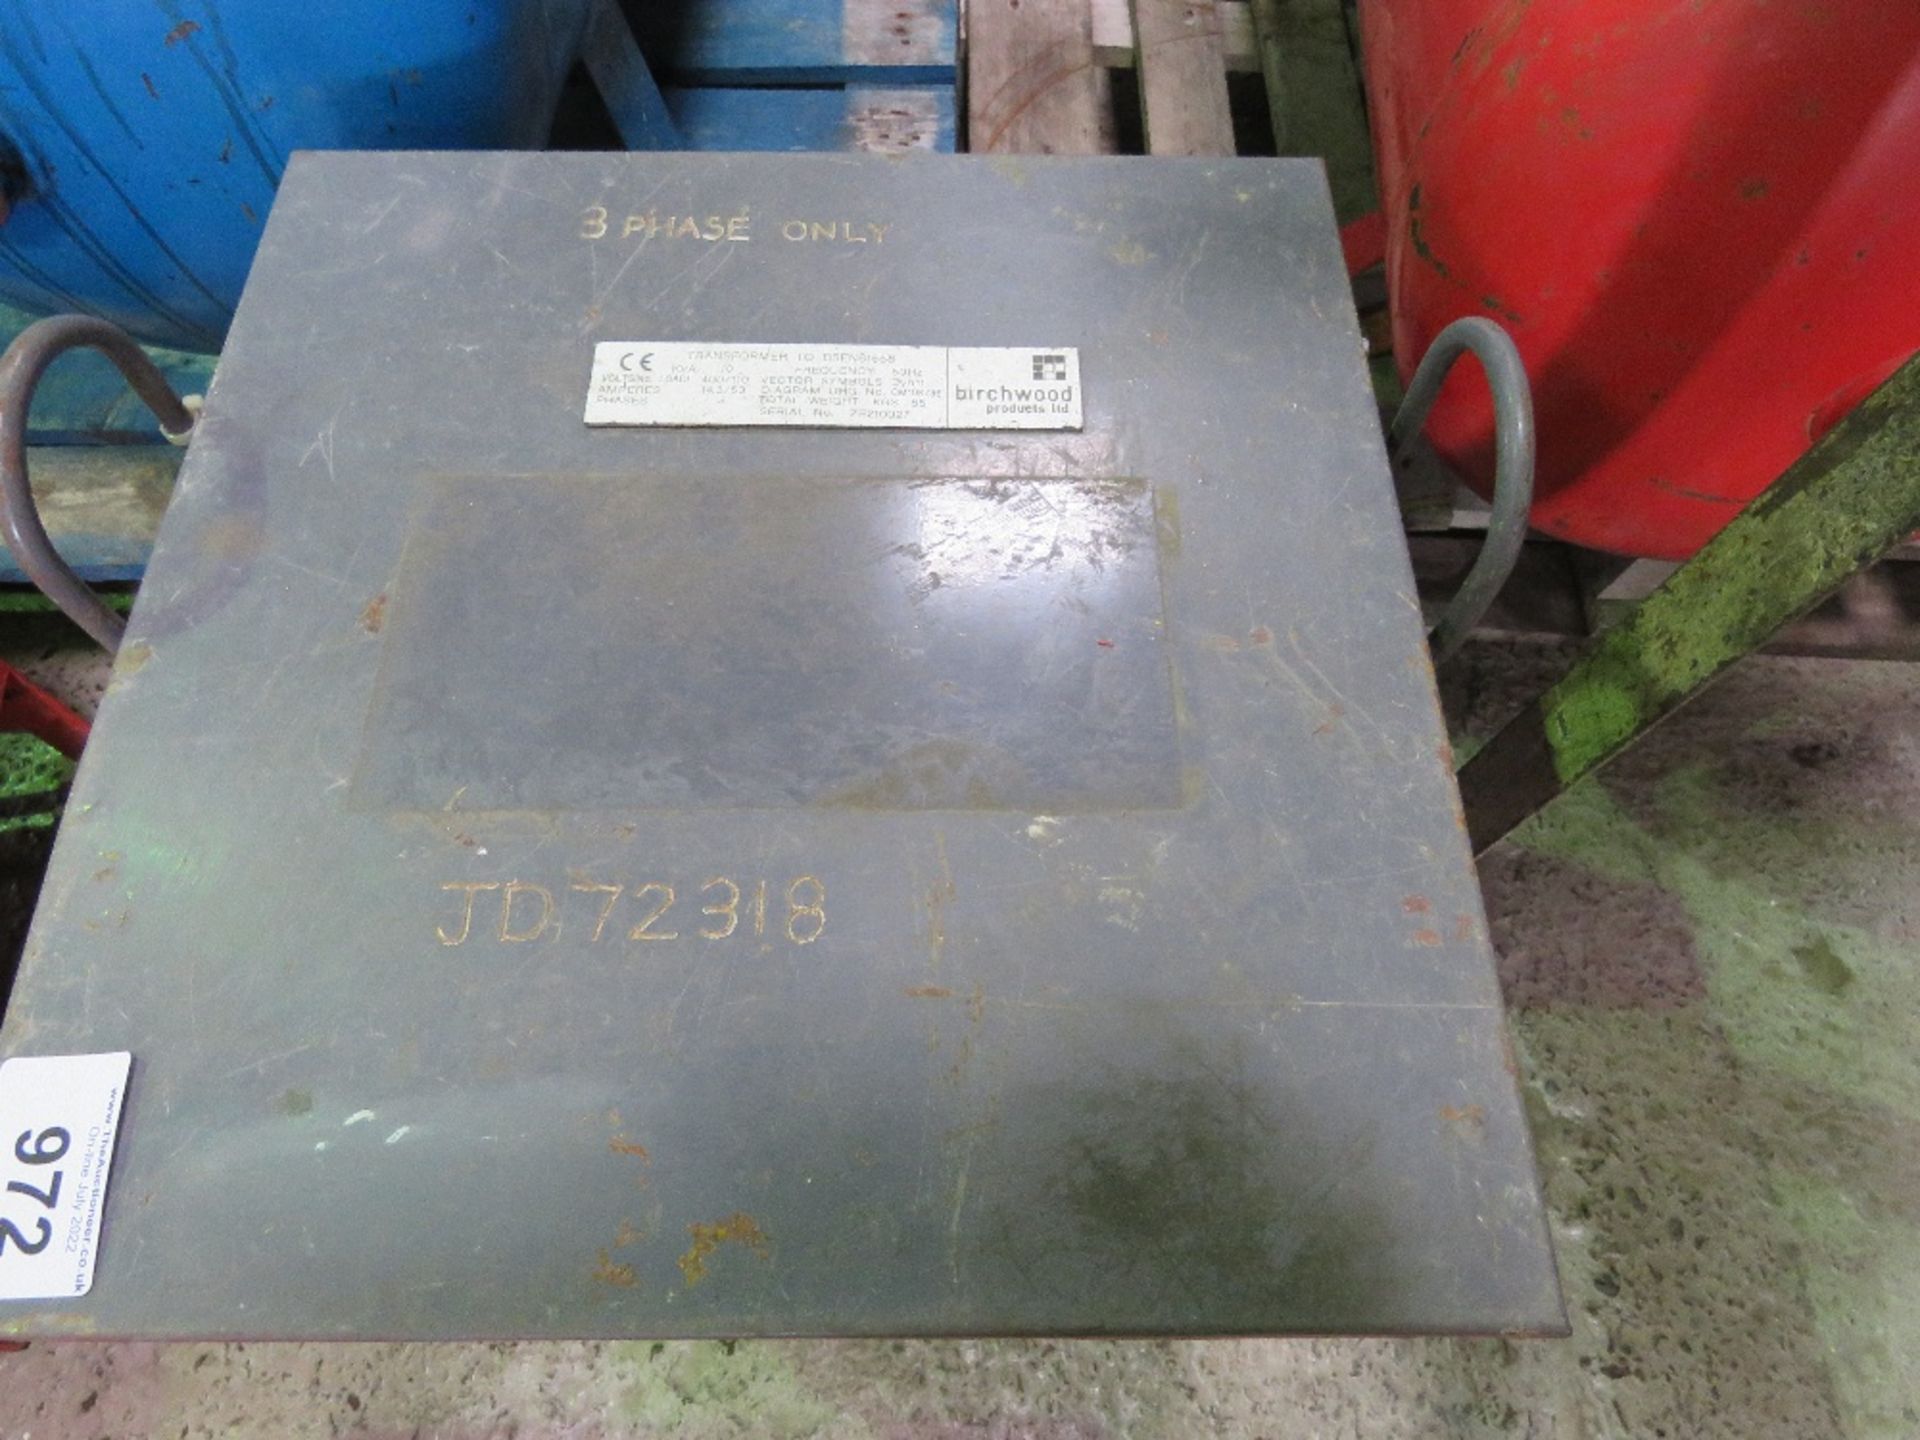 LARGE OUTPUT SITE TRANSFORMER. DIRECT FROM A LOCAL GROUNDWORKS COMPANY AS PART OF THEIR RESTRUCTU